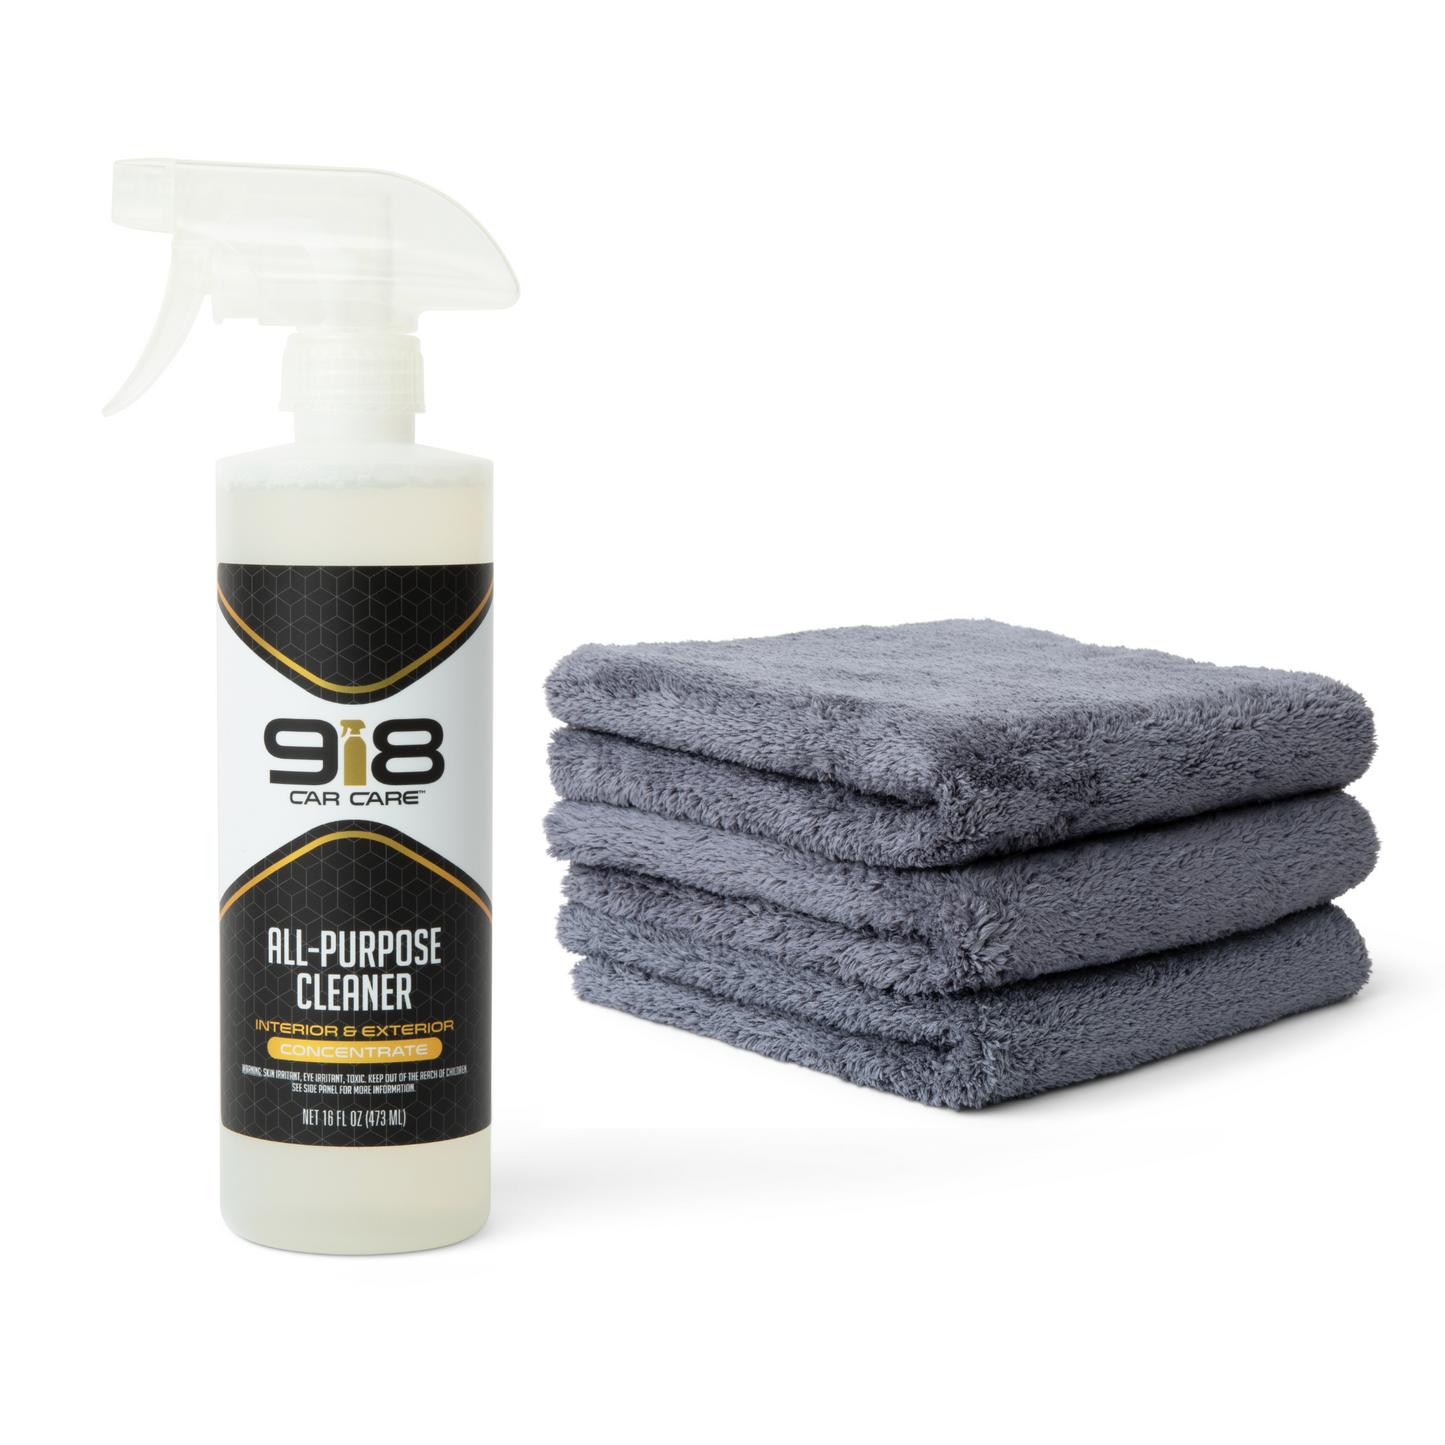 All-Purpose Cleaner [Concentrate] - Towel Combo